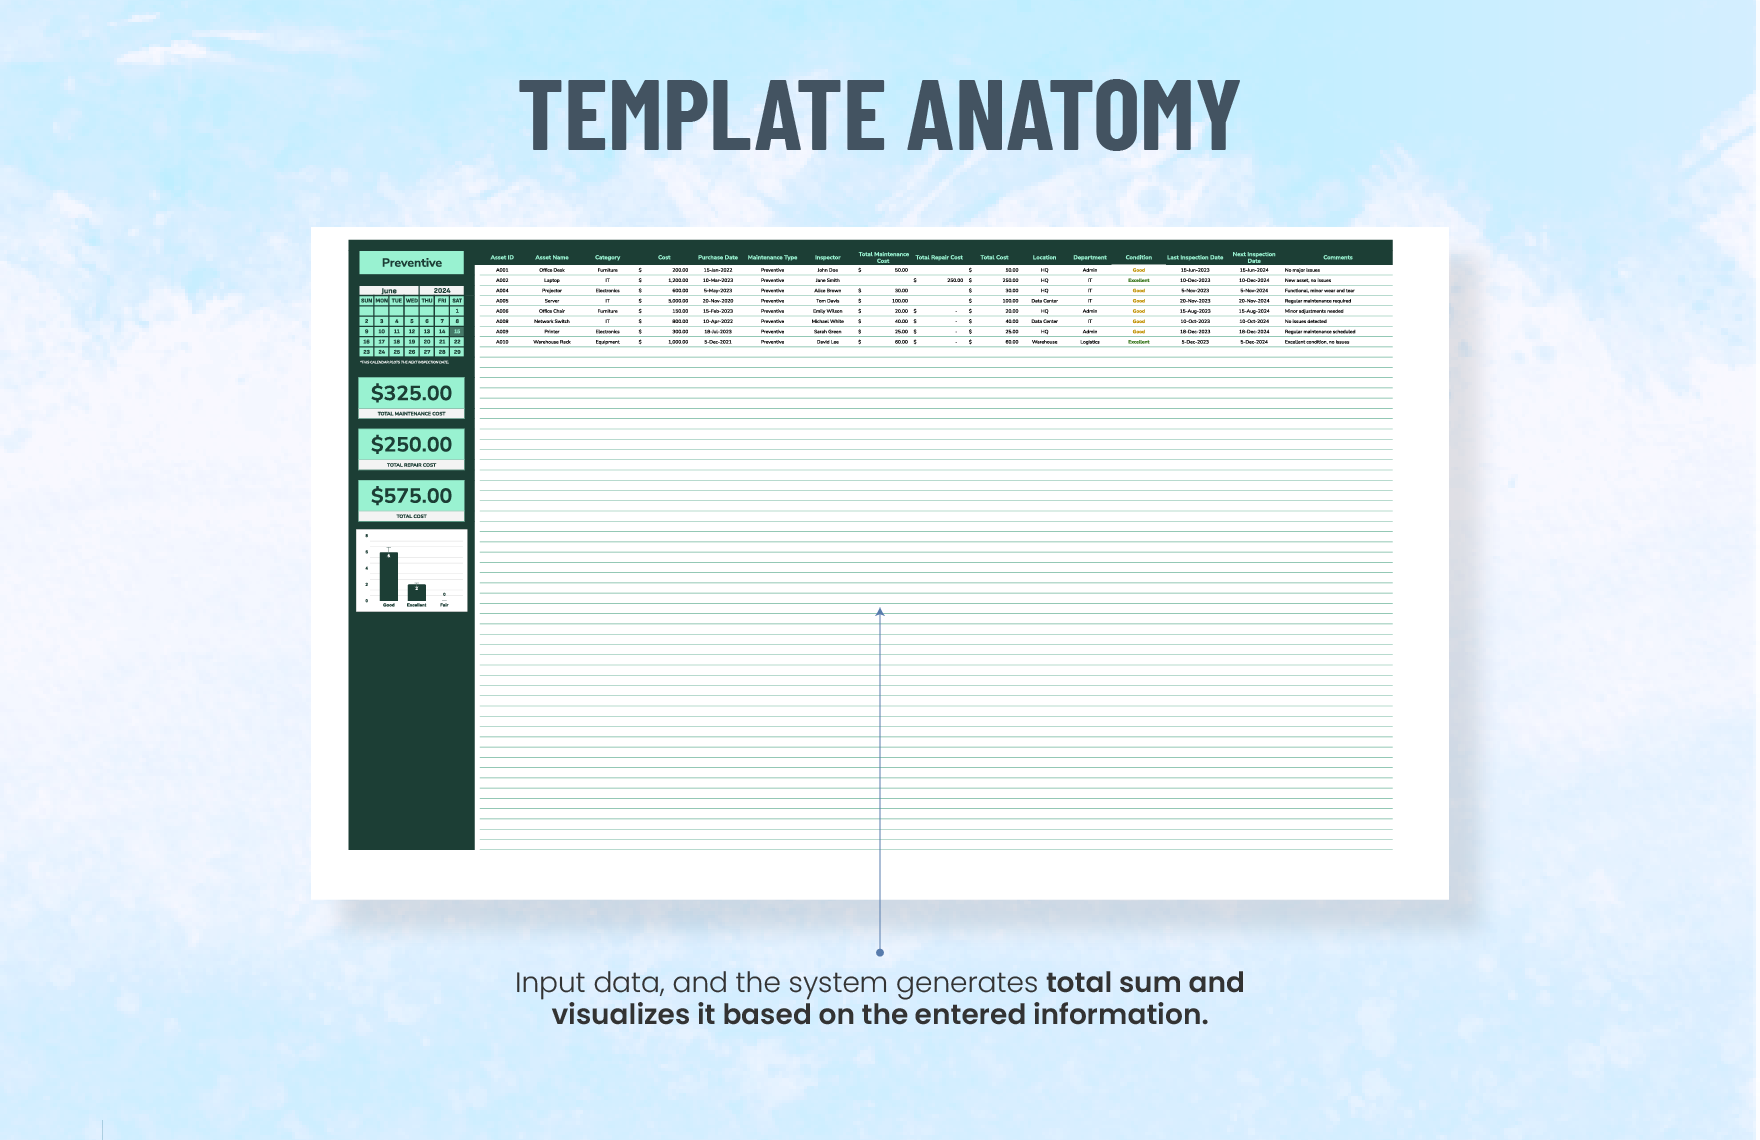 Accounting Asset Condition Monitoring Template